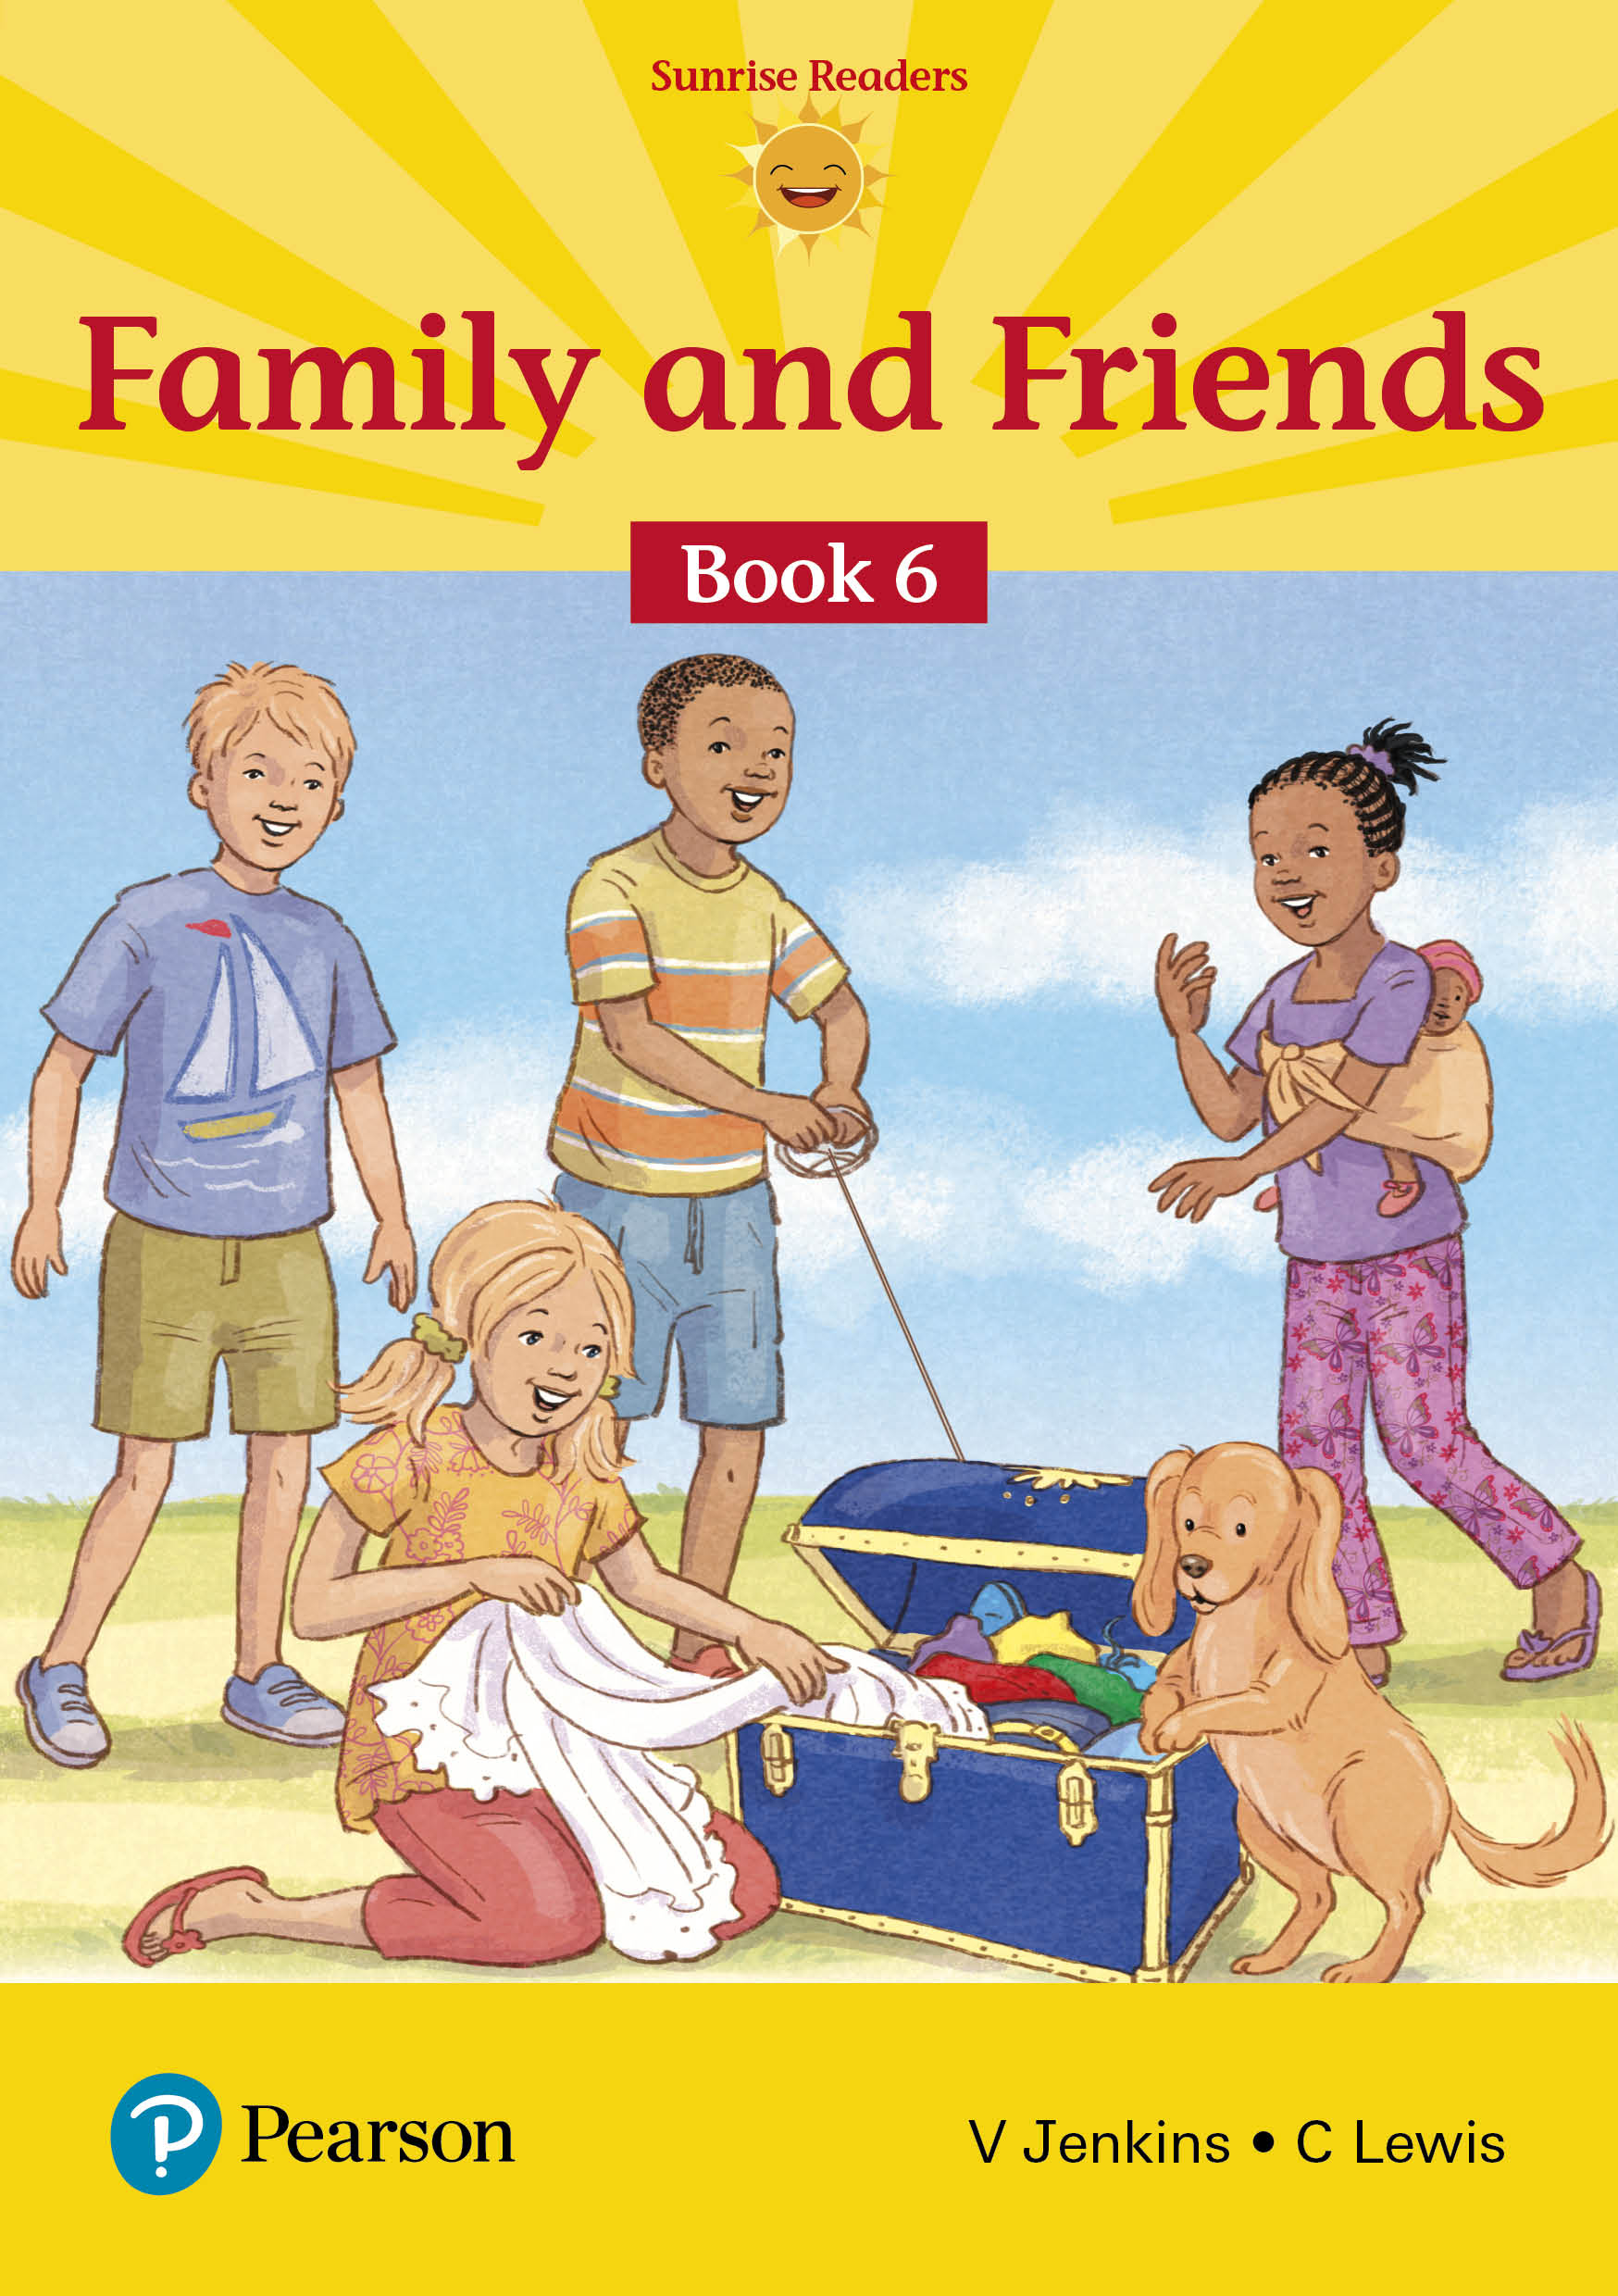 Family and Friends - Book 6